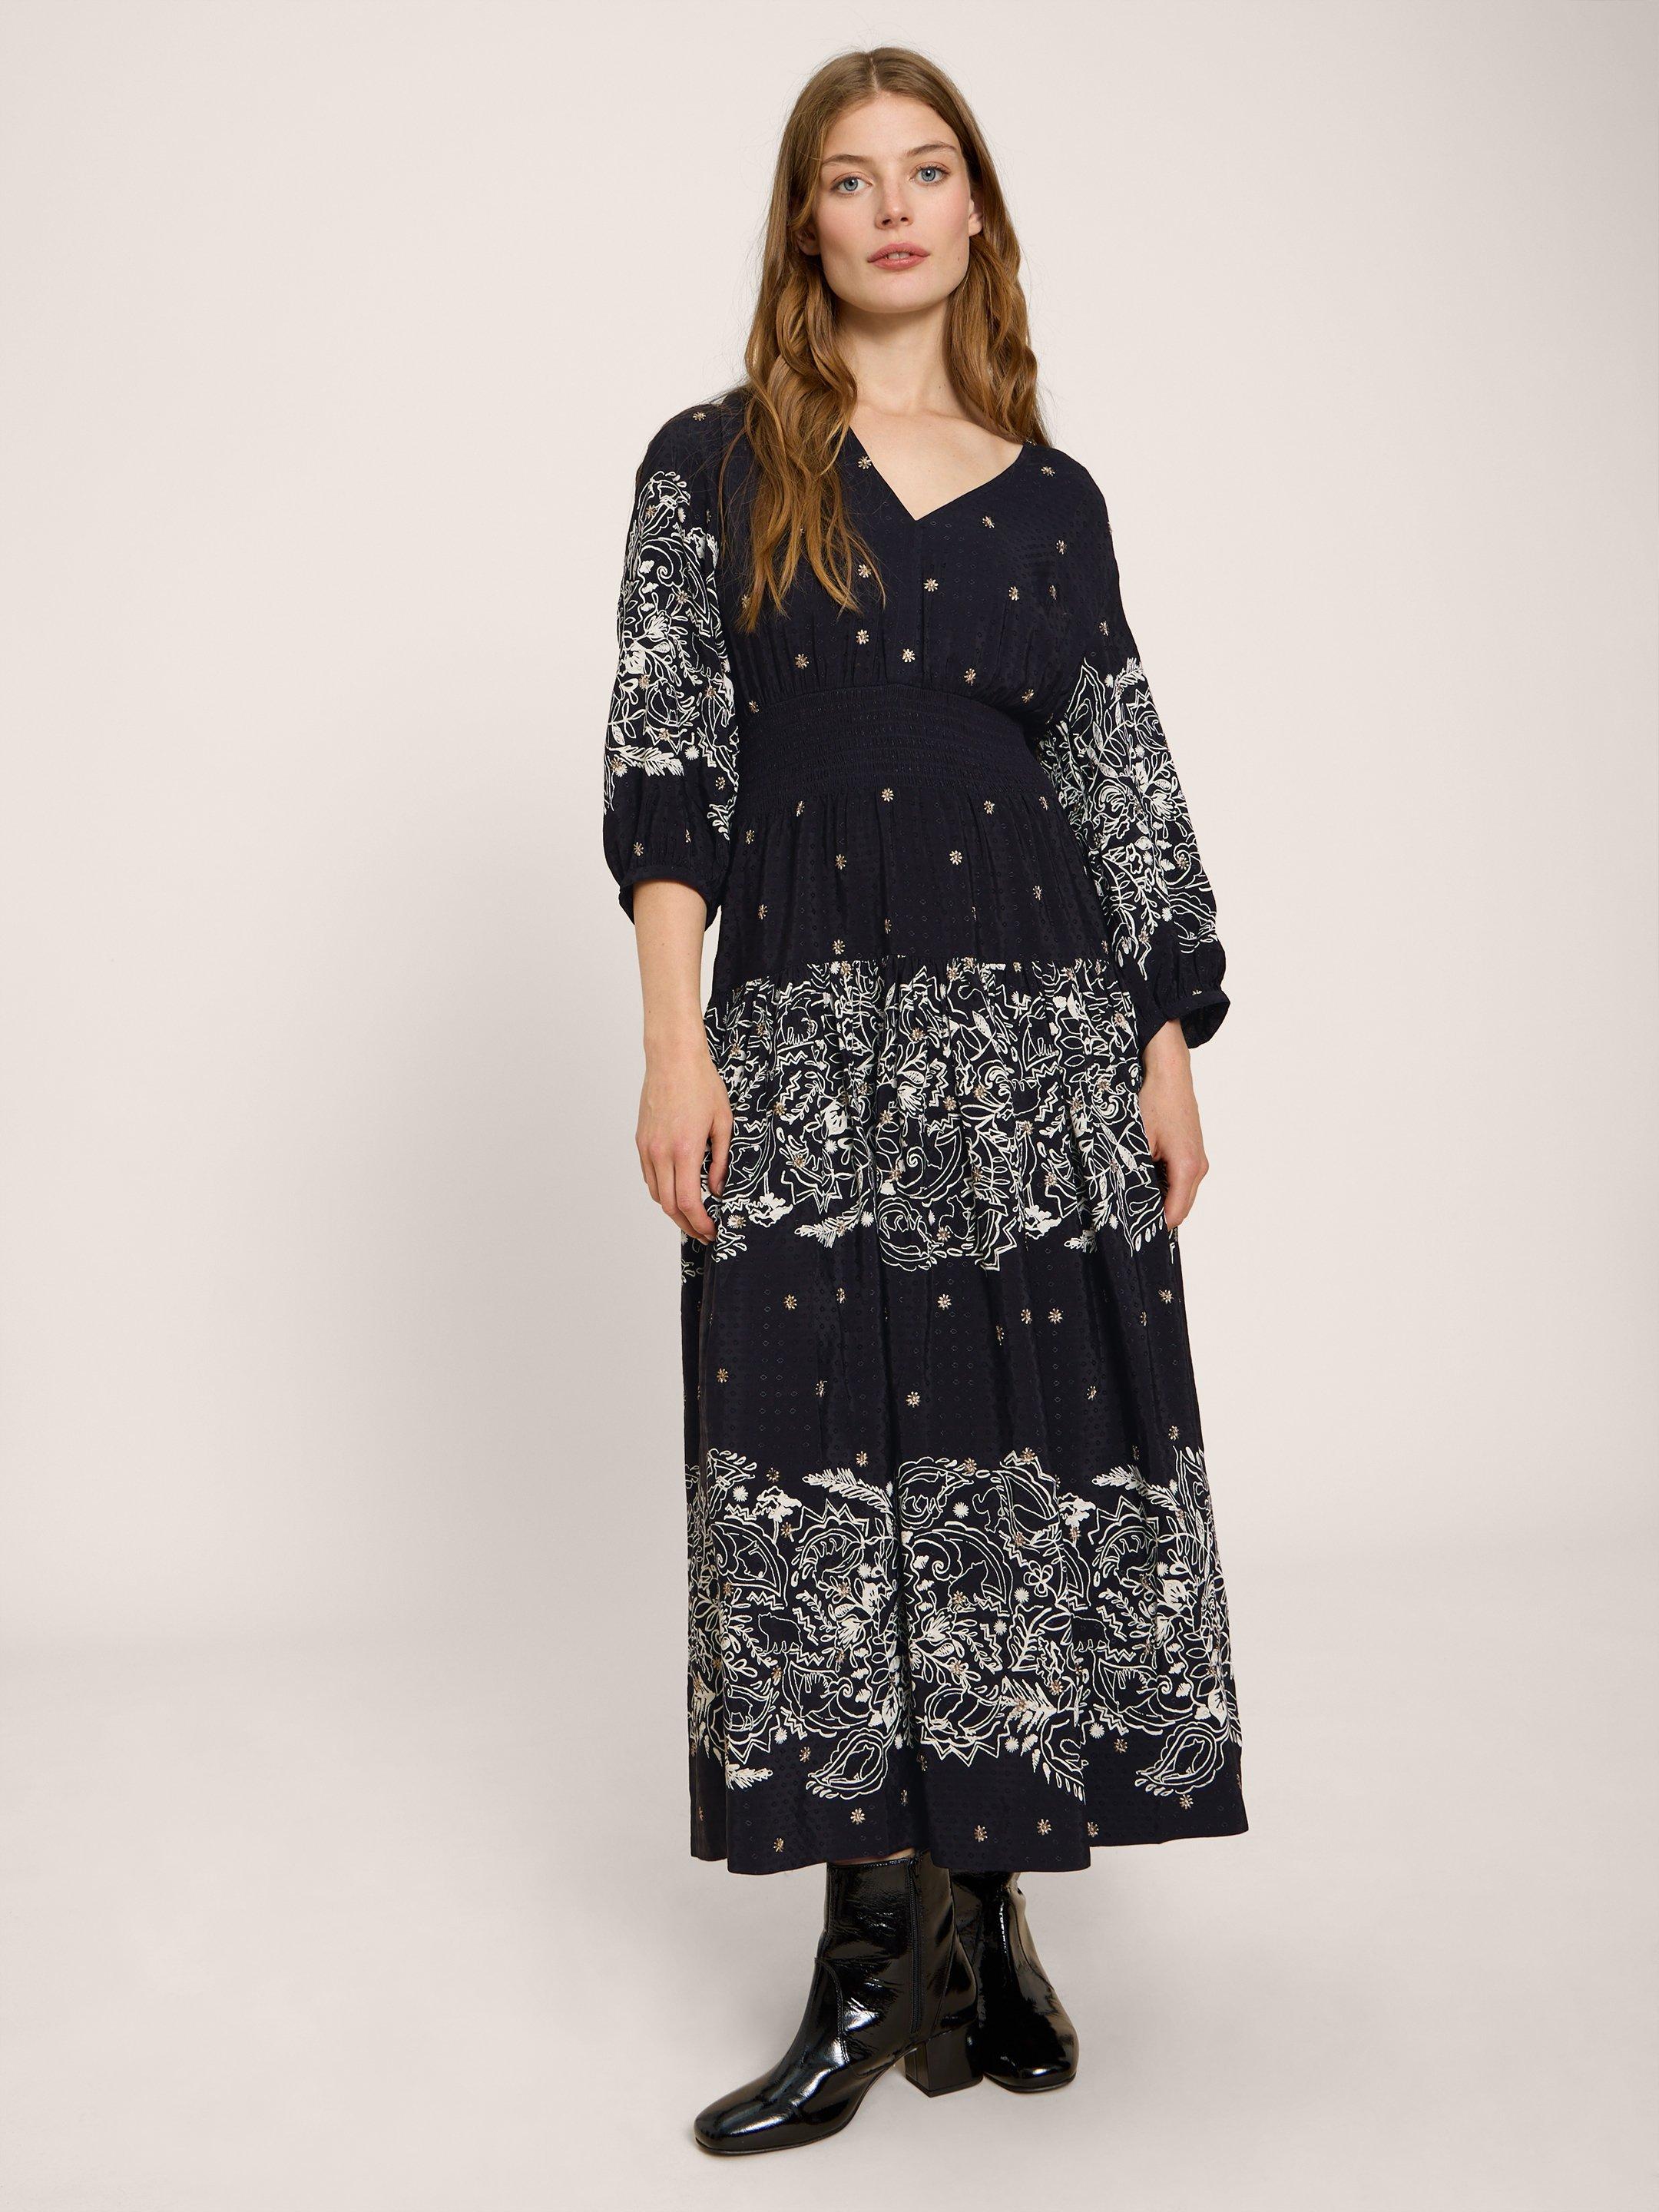 Maude Printed Embroidered Dress in BLK MLT - MODEL FRONT